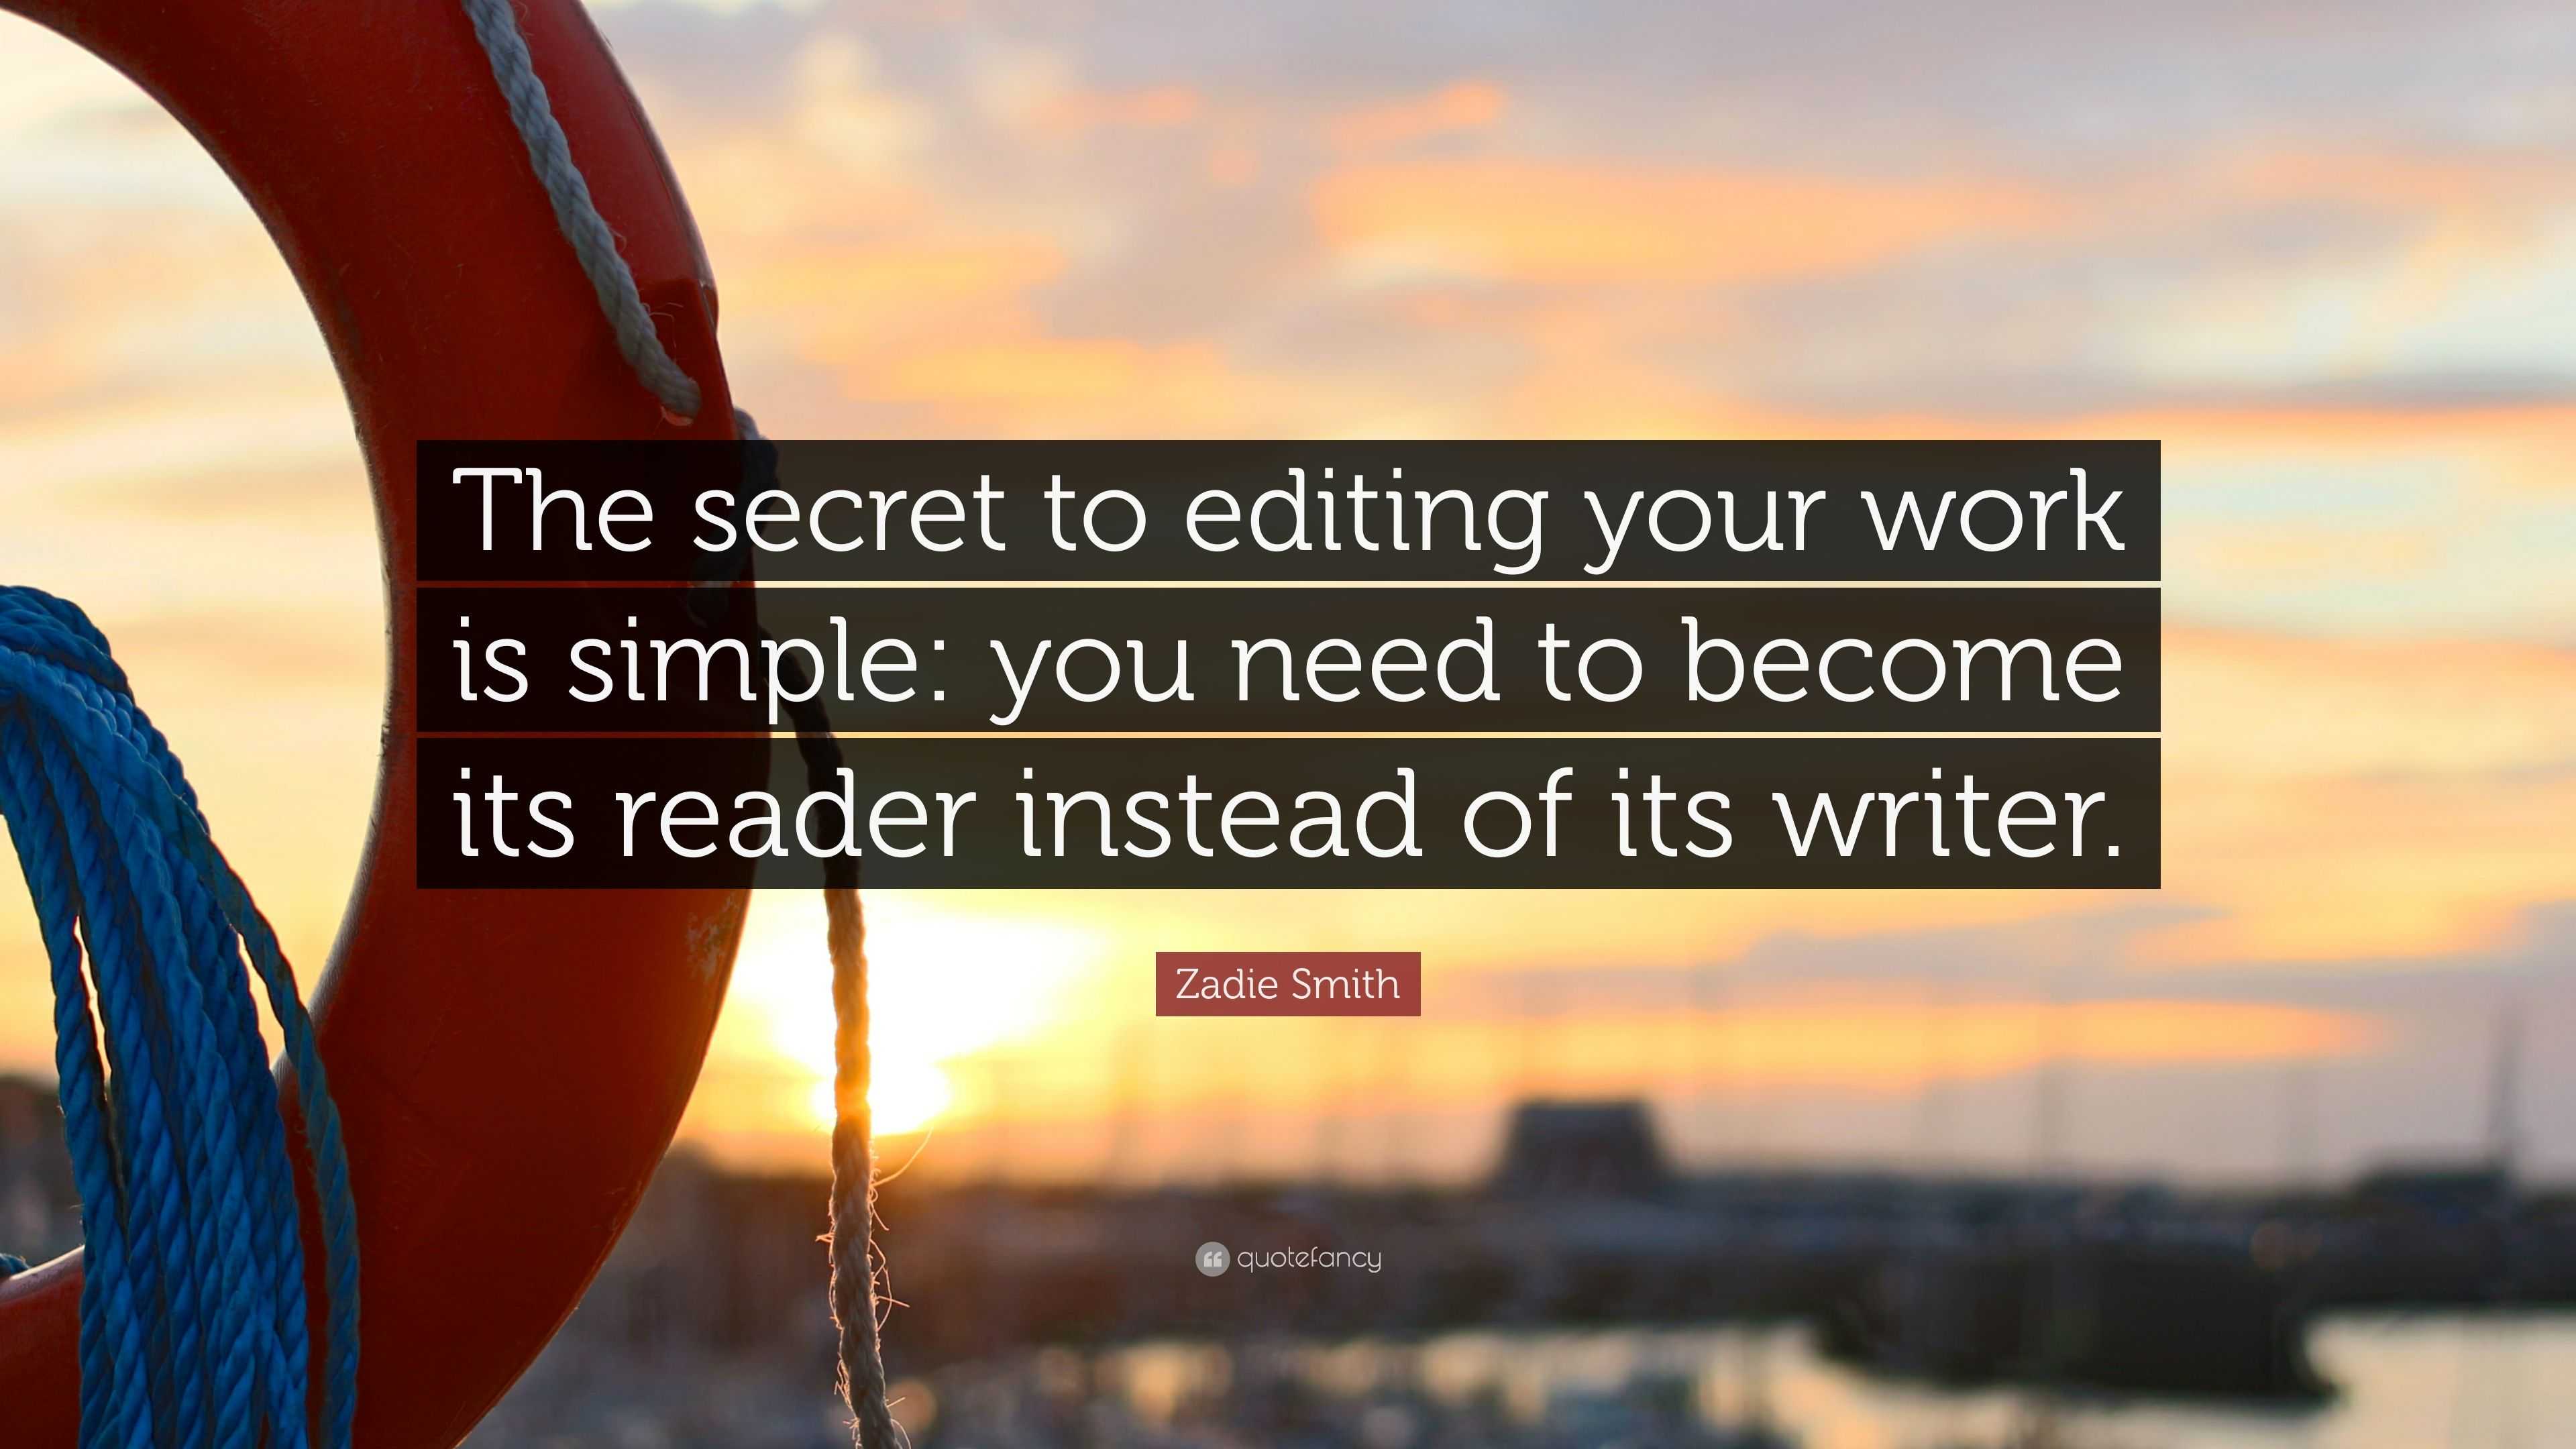 Zadie Smith Quote: “The secret to editing your work is simple: you need